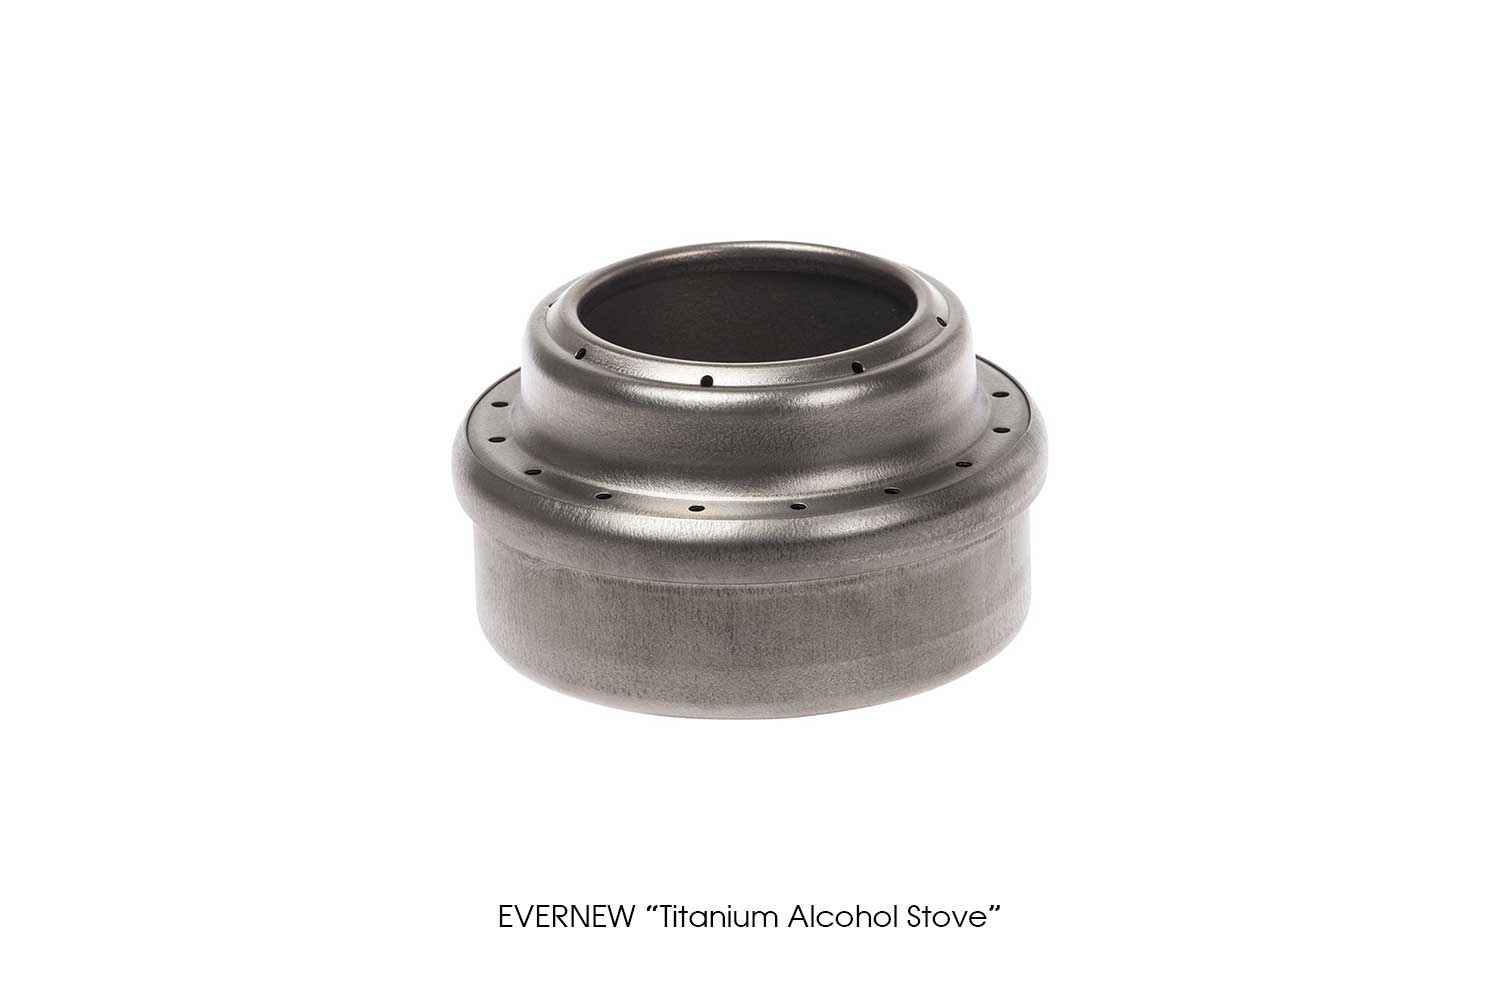 EVERNEW "Alcohol Stove"